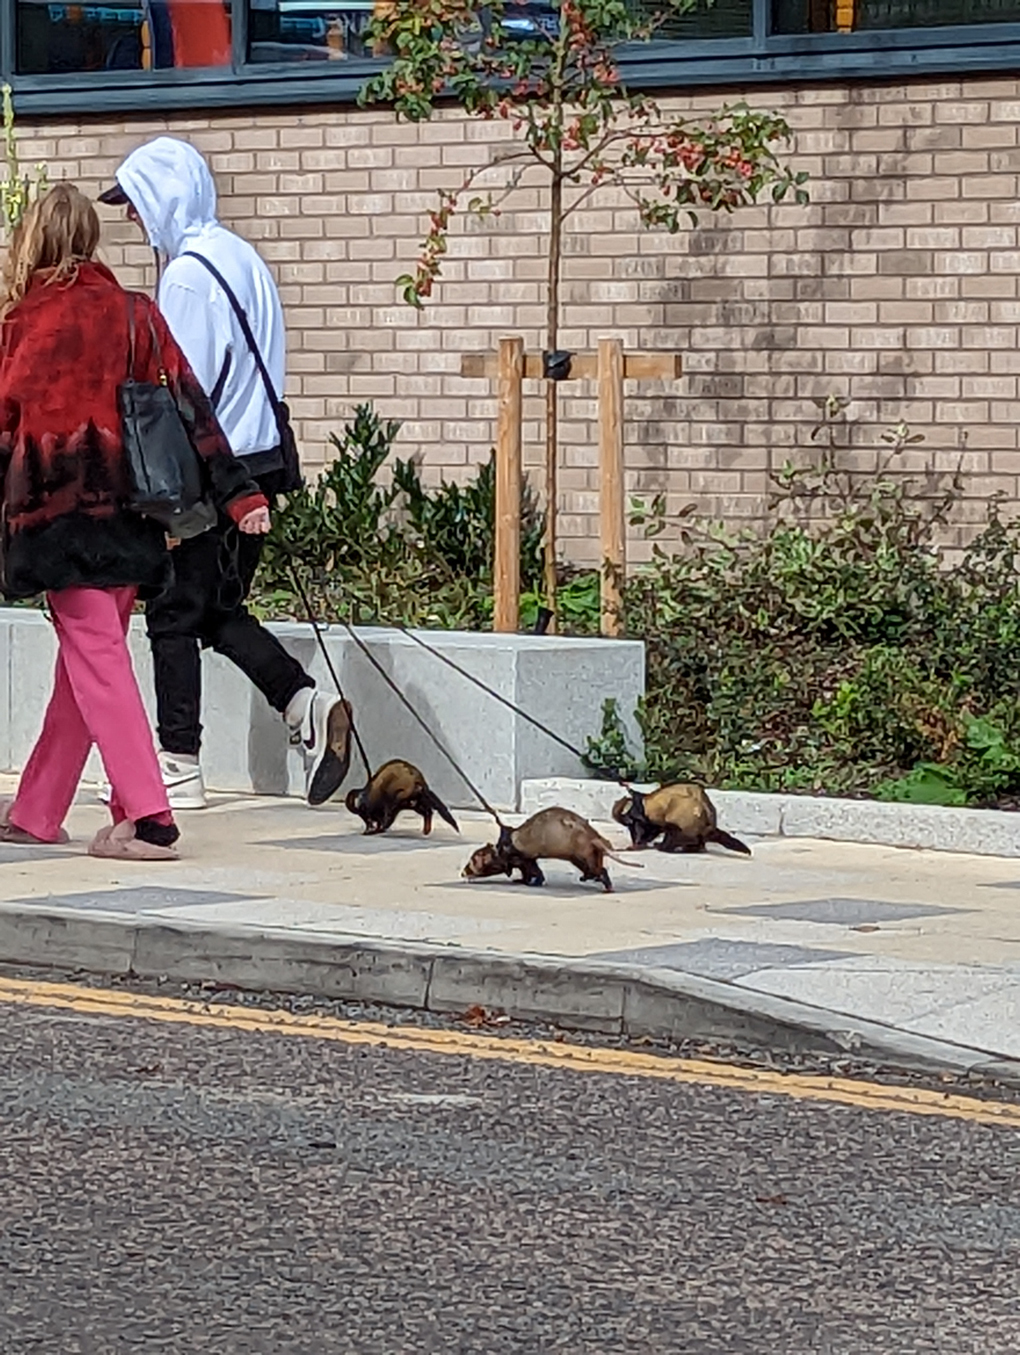 Walking ferrets on harnesses in Bucks on an otherwise normal day